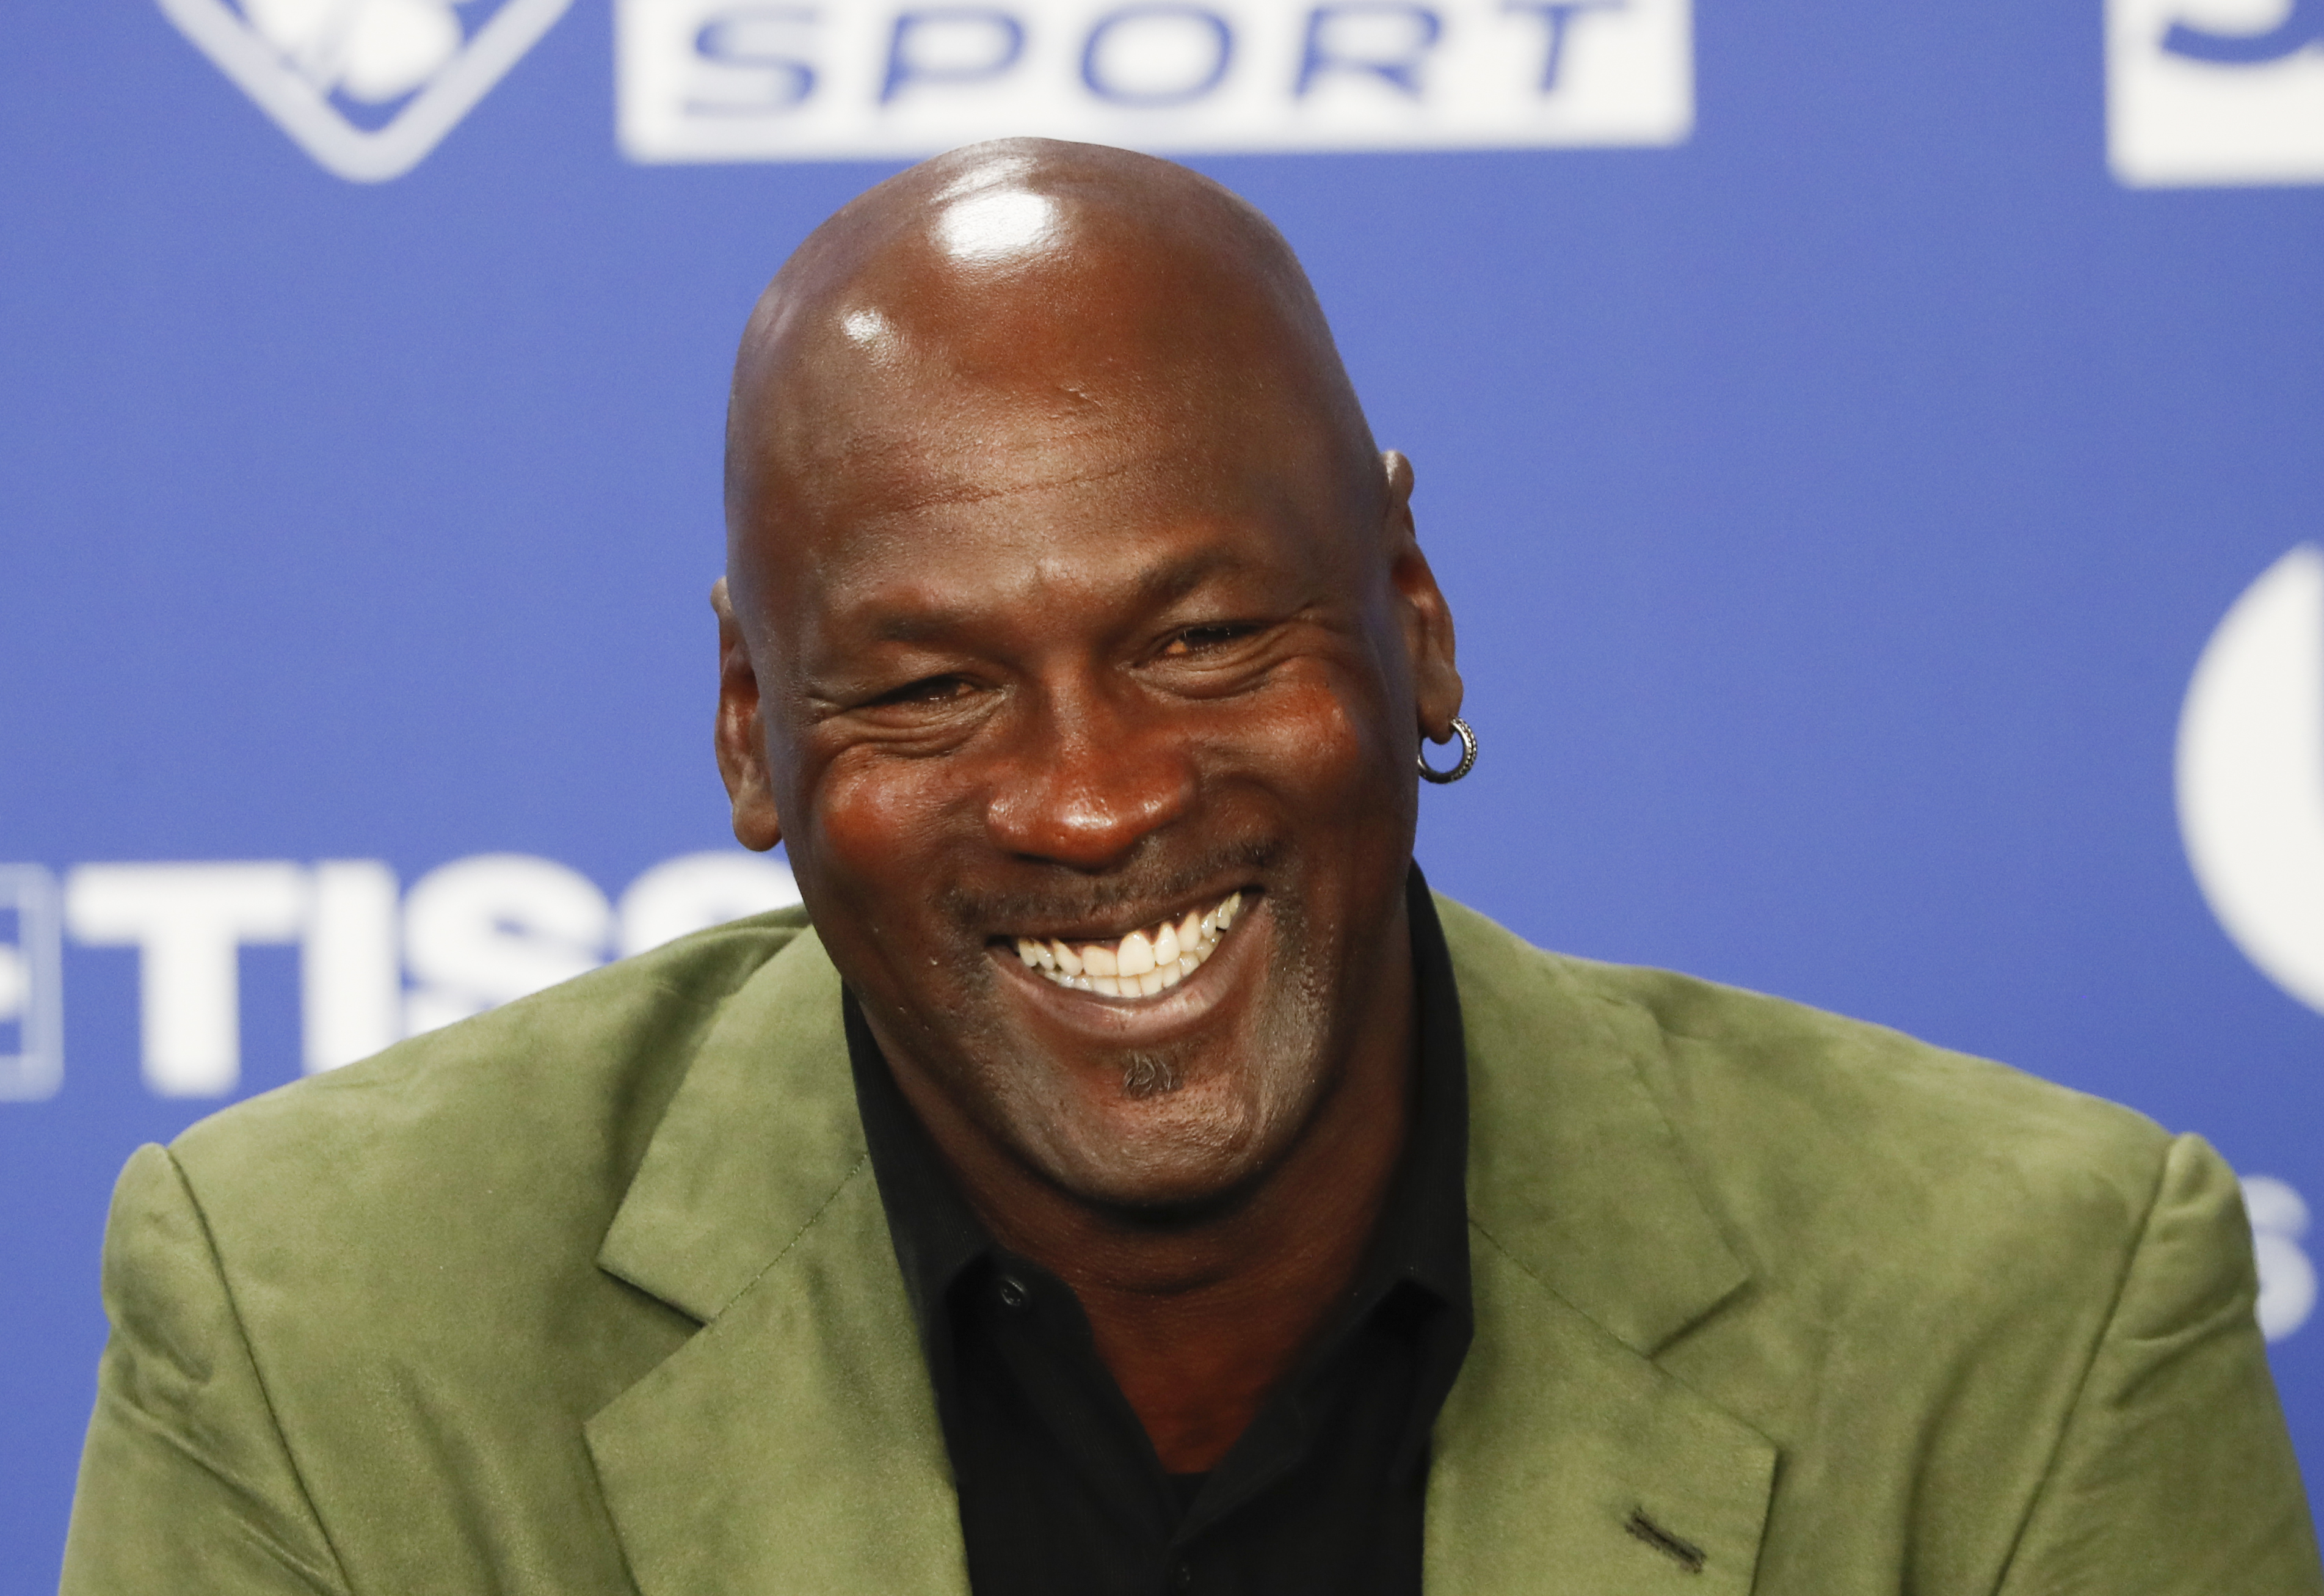 Michael Jordan becomes first athlete to crack Forbes 400 list of America’s richest people